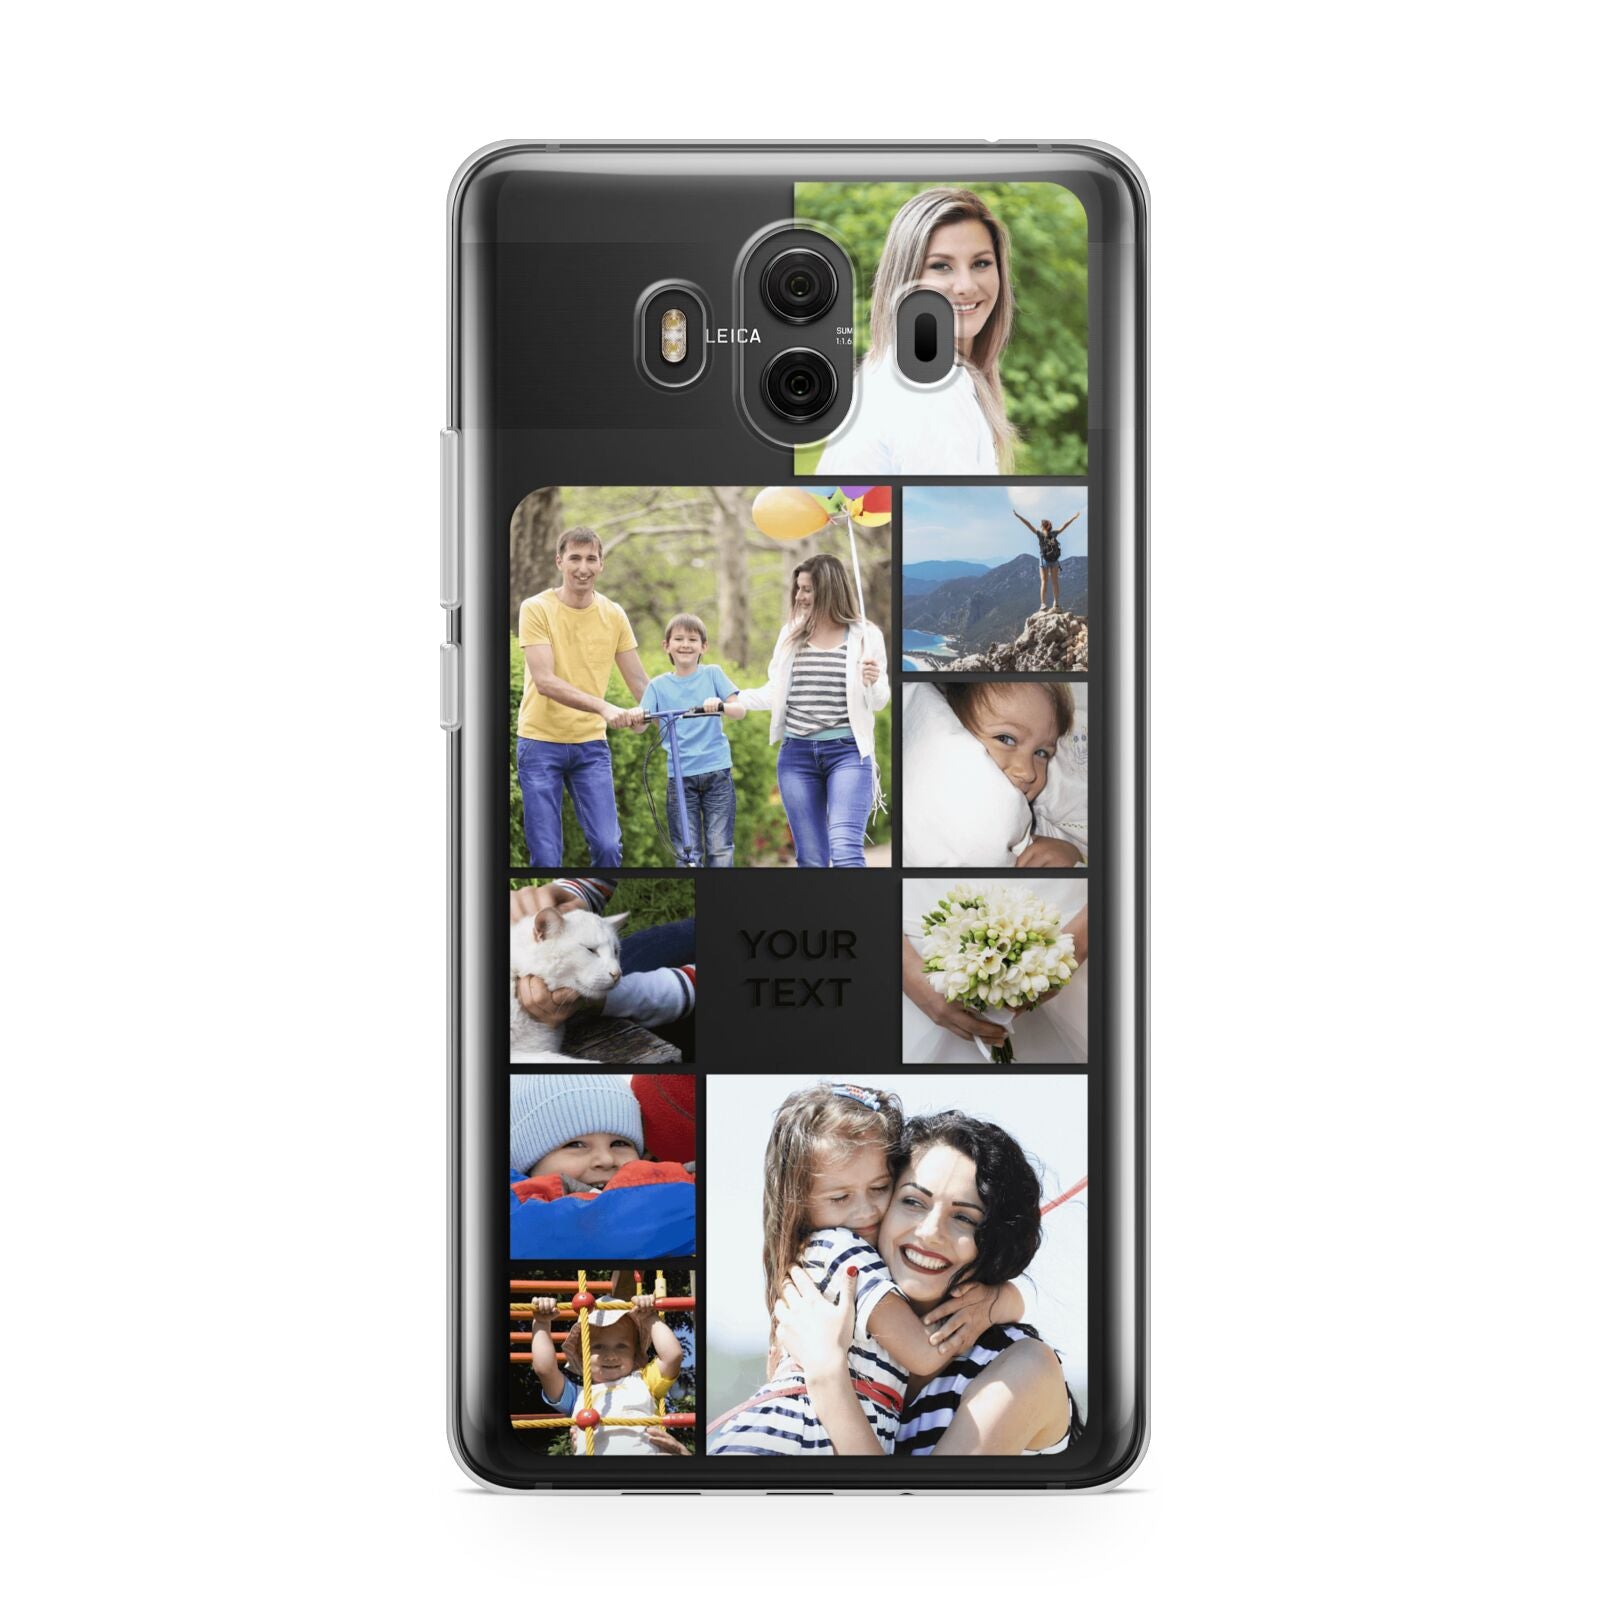 Personalised Photo Grid Huawei Mate 10 Protective Phone Case